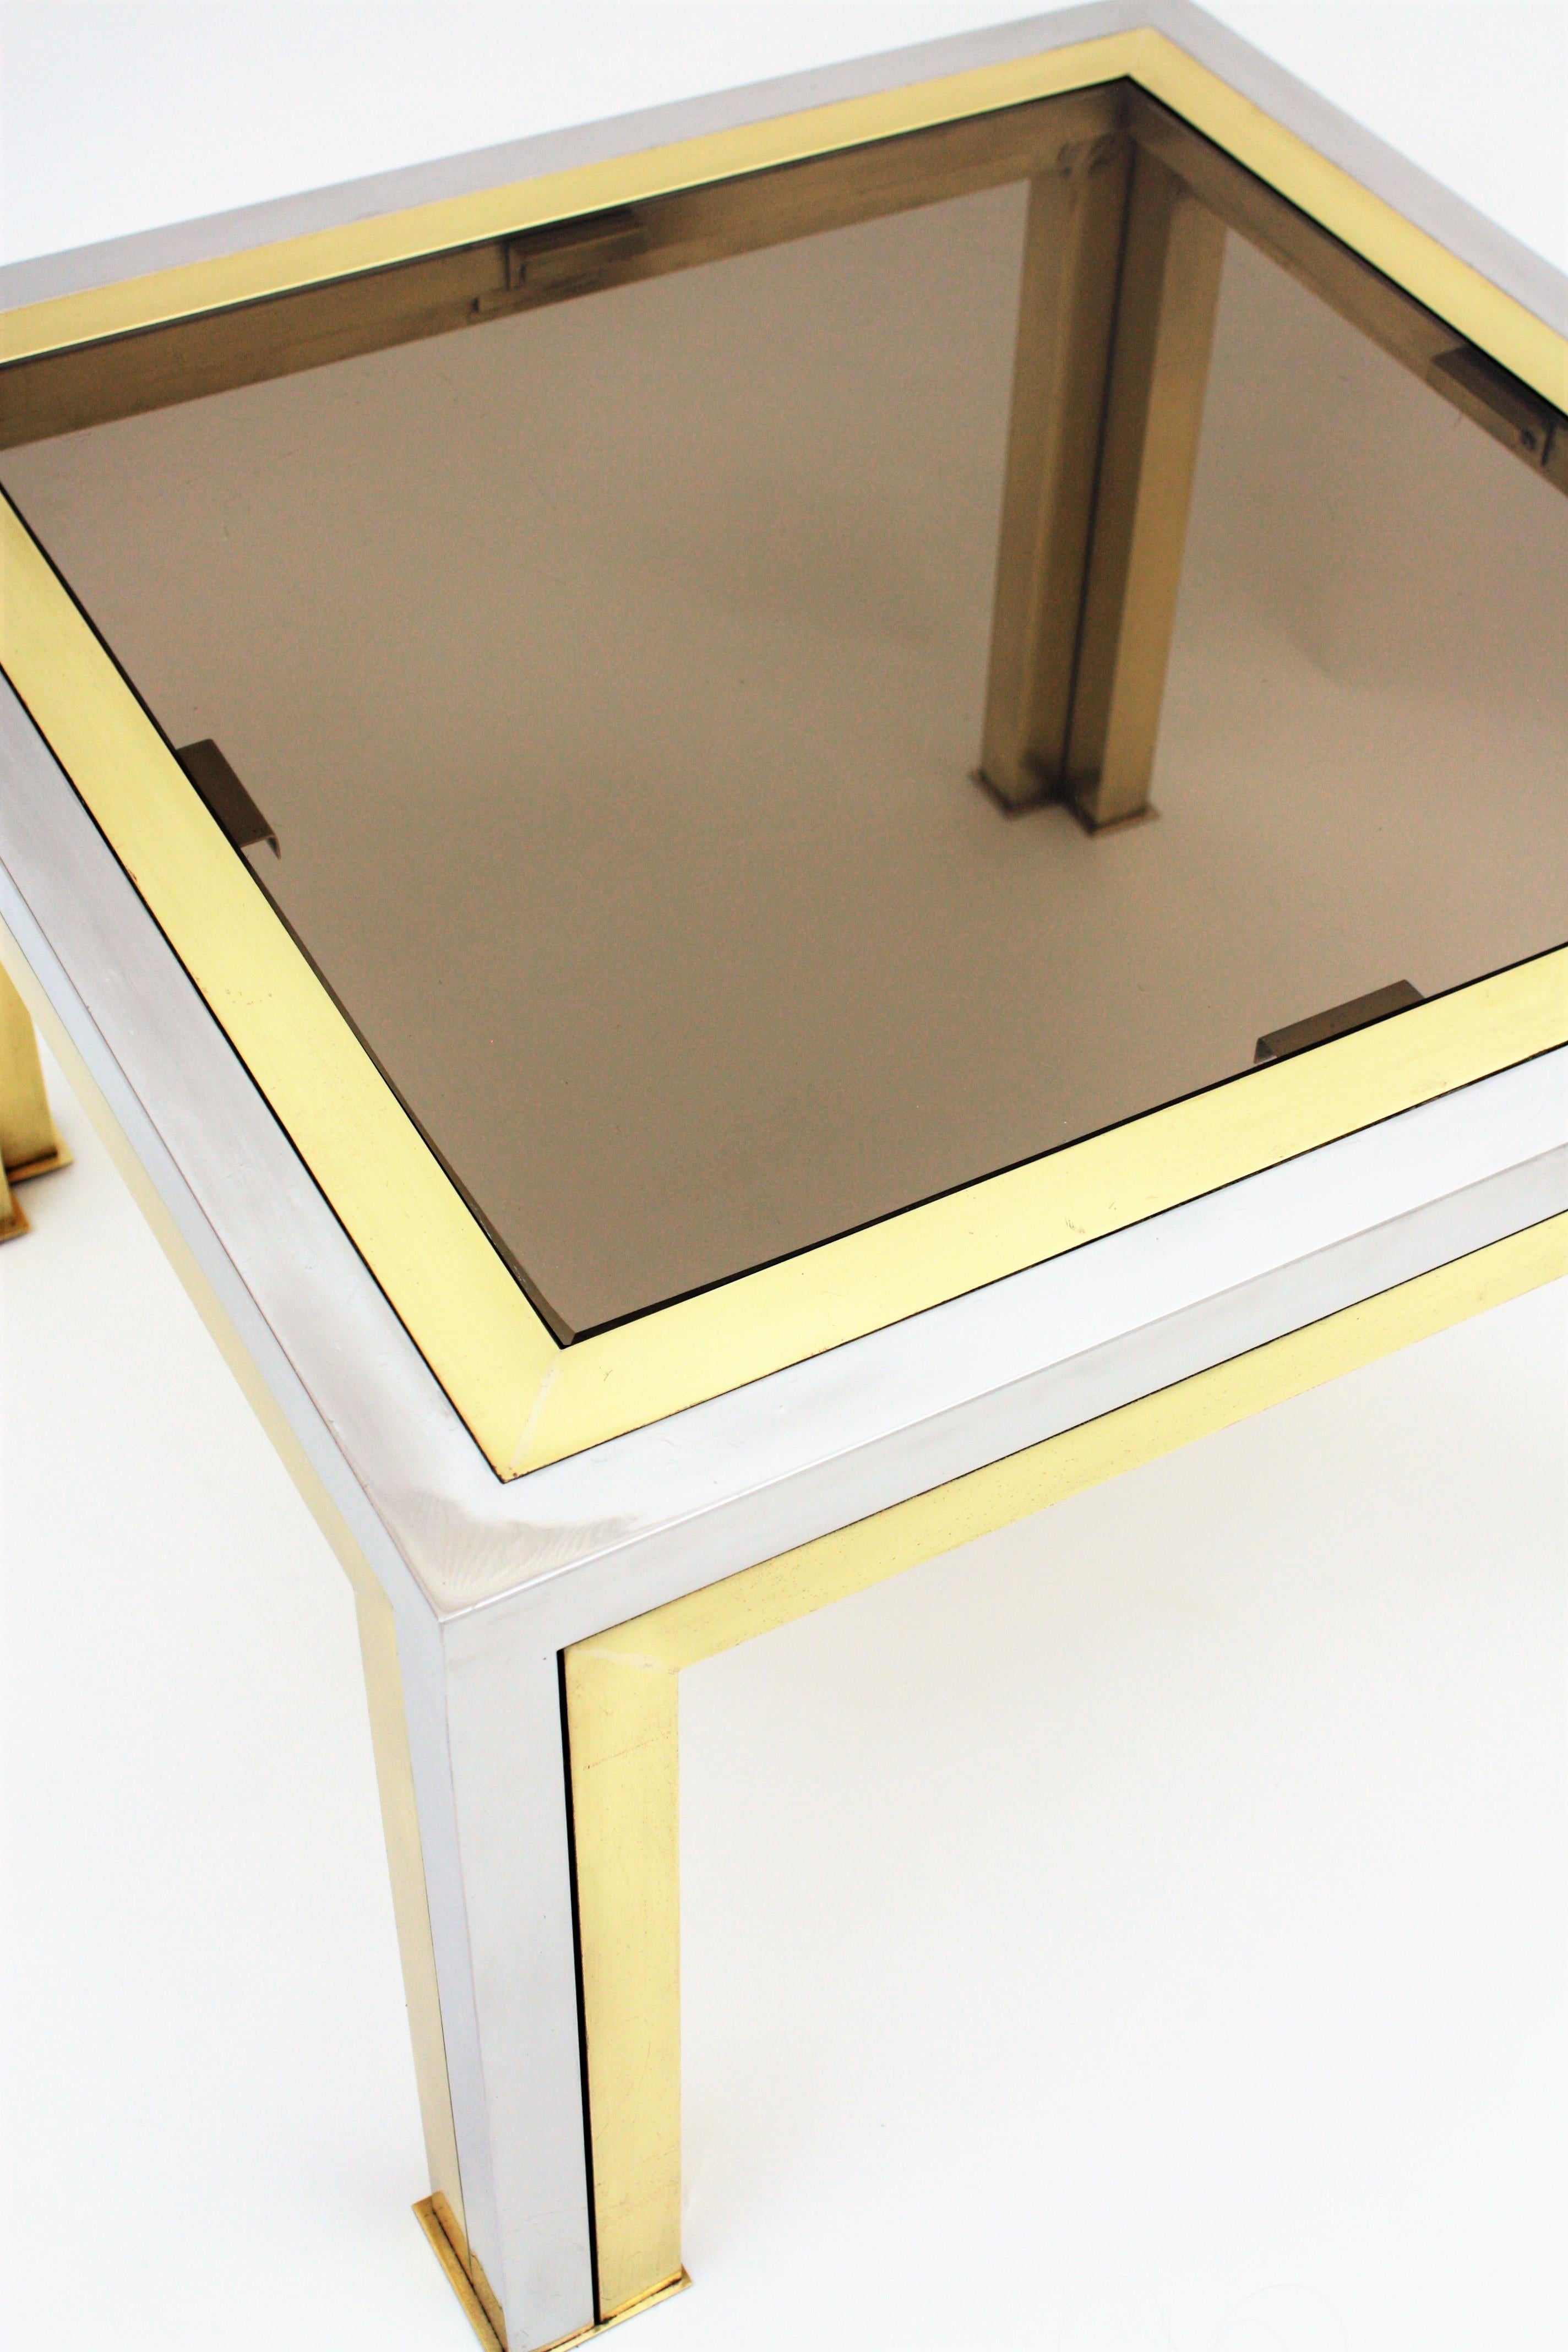 Romeo Rega Coffee Table in Brass, Chromed Steel and Glass 6